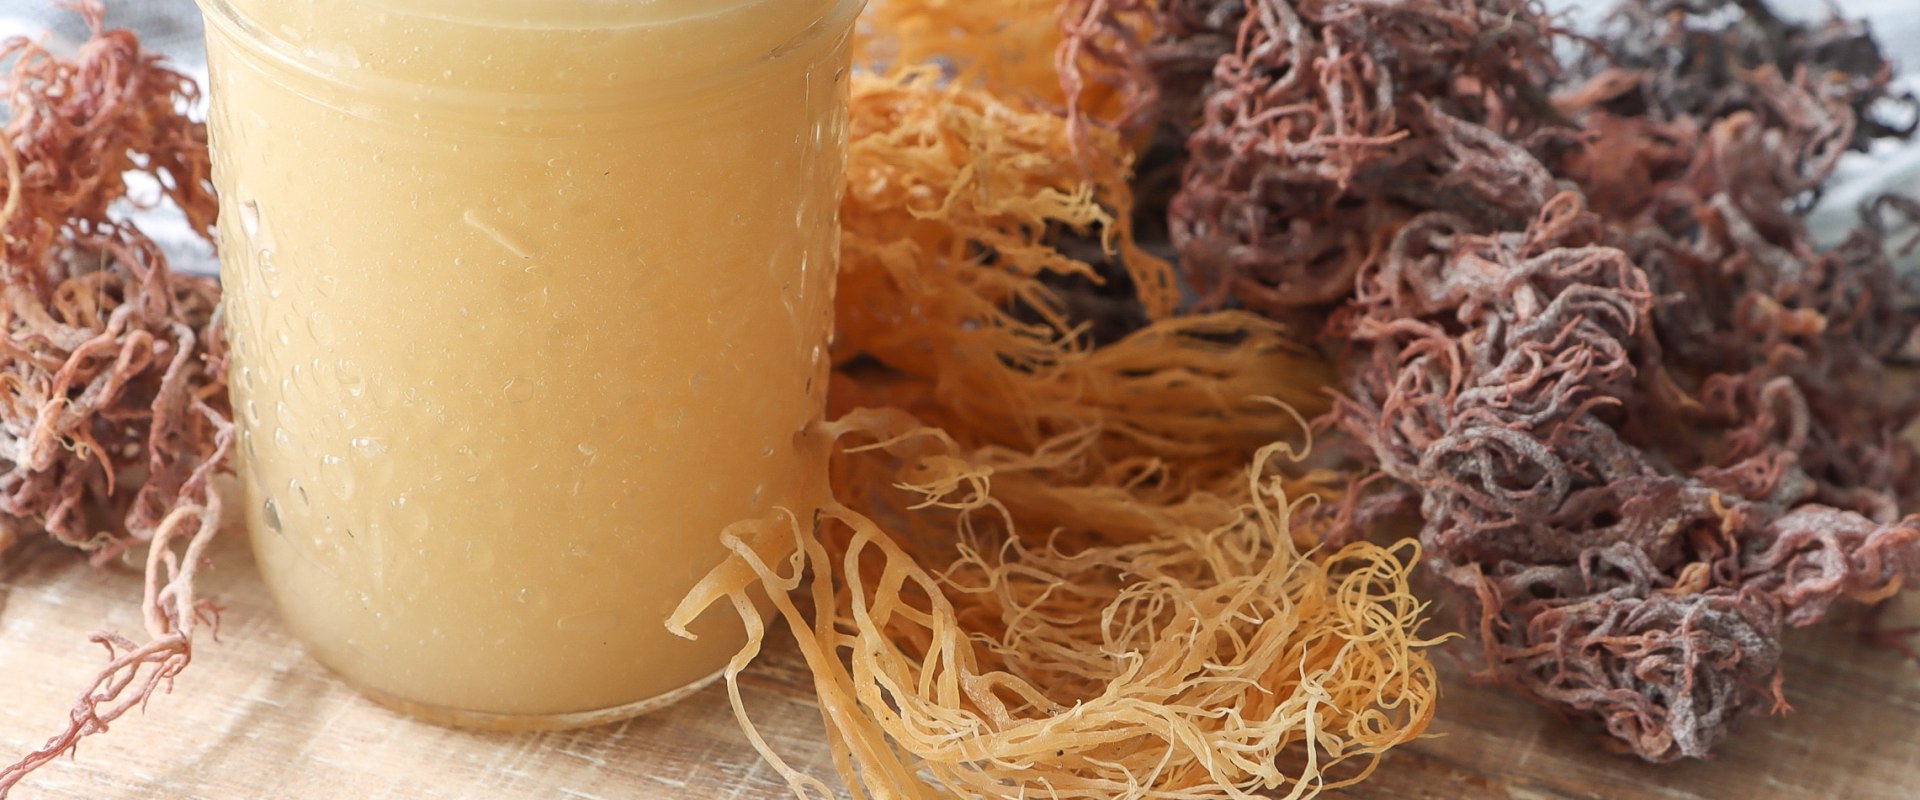 Sea Moss Calories and Fat Content: A Comprehensive Overview